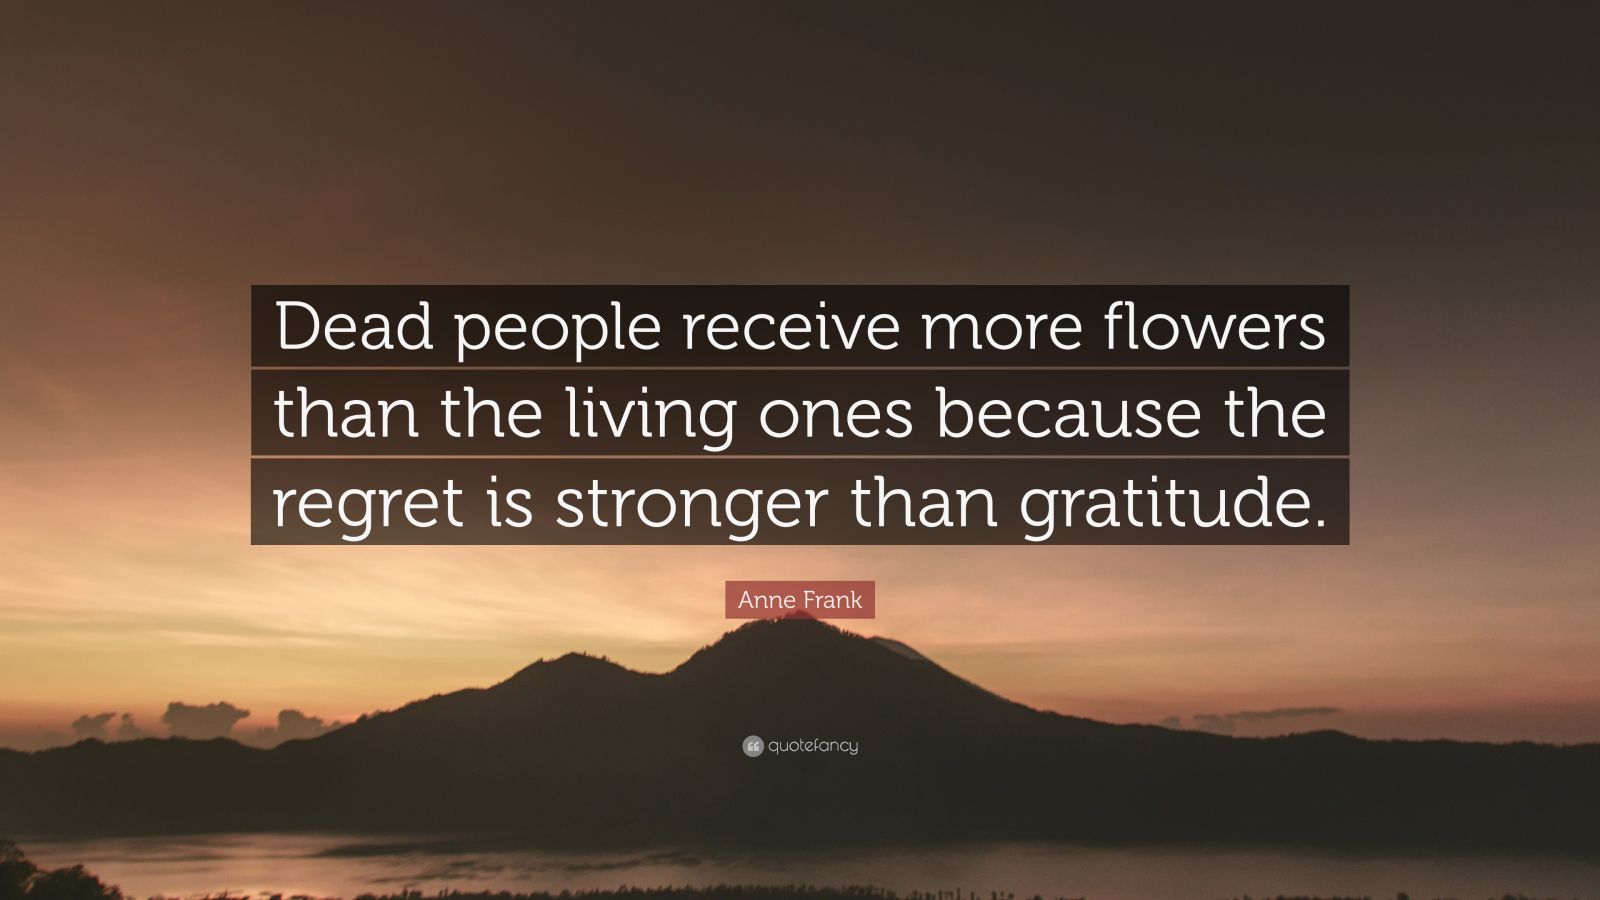 Anne Frank Quote: “Dead people receive more flowers than the living ...